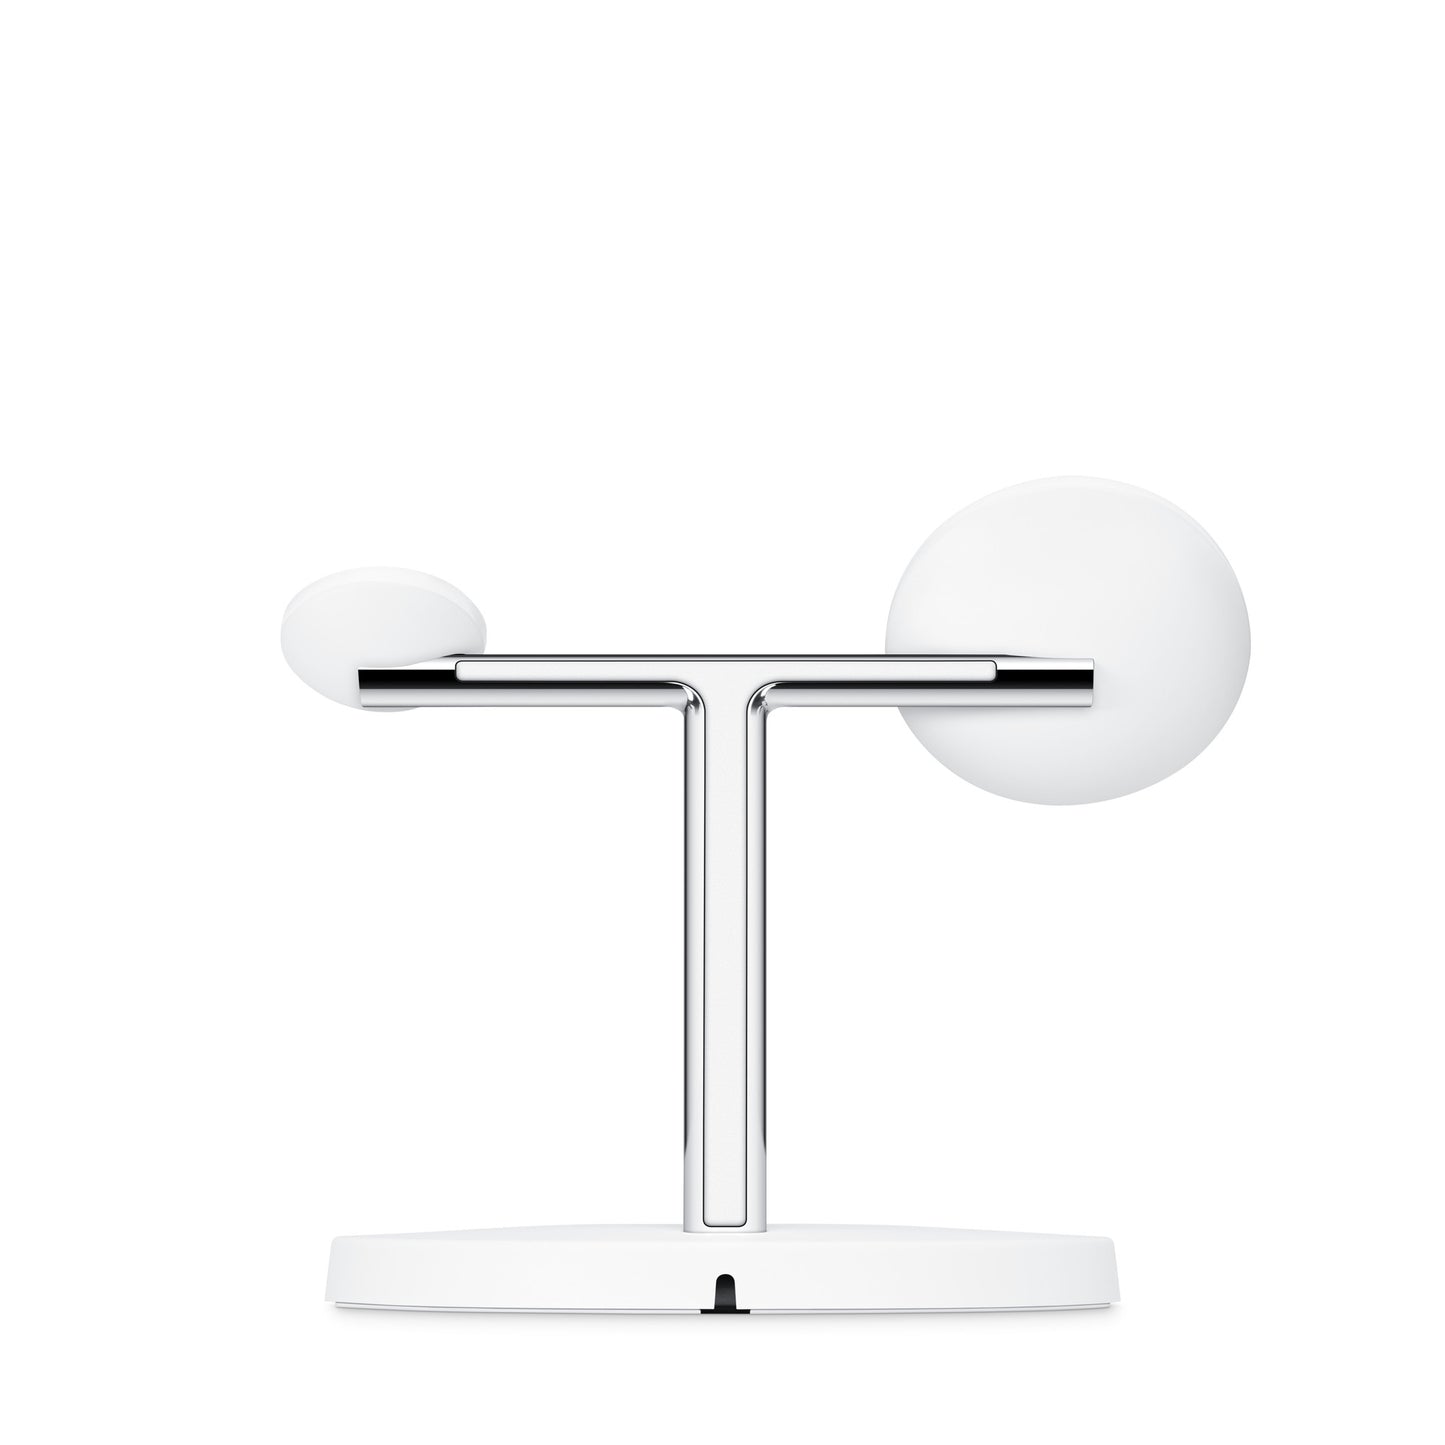 BELKIN 3-in-1 Wireless Charging Stand with MagSafe - White